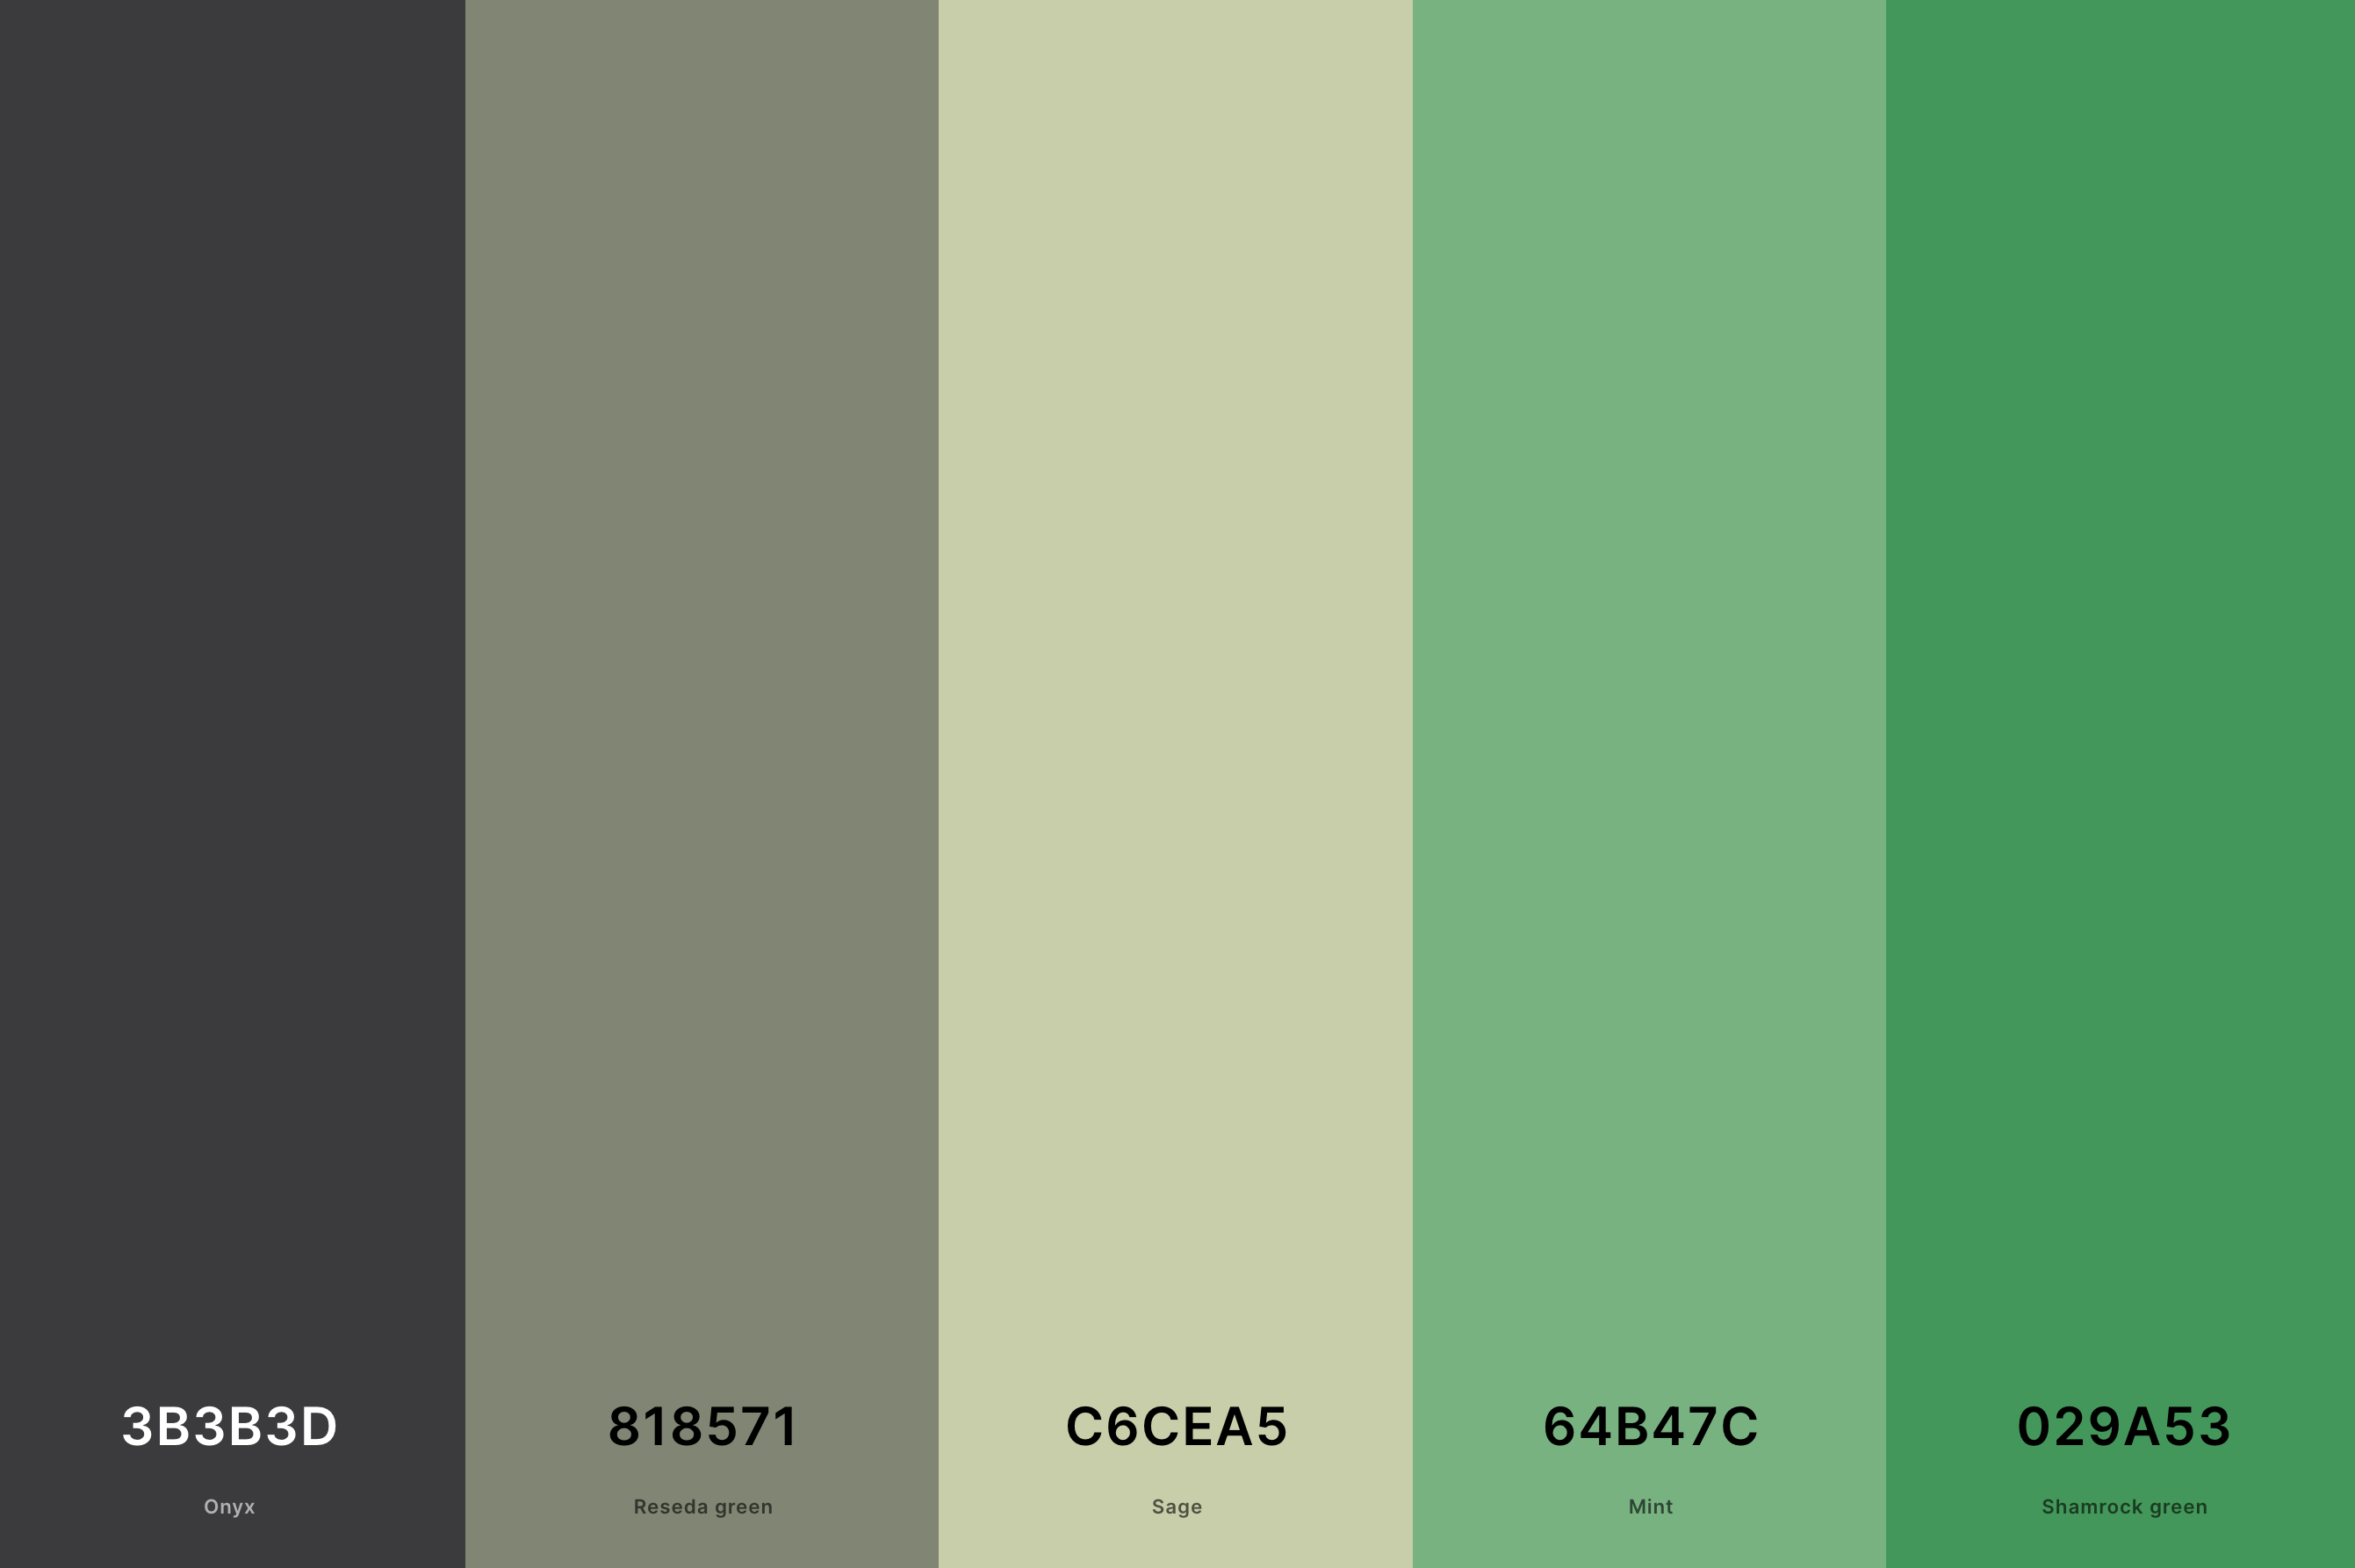 16. Green Retro Color Palette Color Palette with Onyx (Hex #3B3B3D) + Reseda Green (Hex #818571) + Sage (Hex #C6CEA5) + Mint (Hex #64B47C) + Shamrock Green (Hex #029A53) Color Palette with Hex Codes